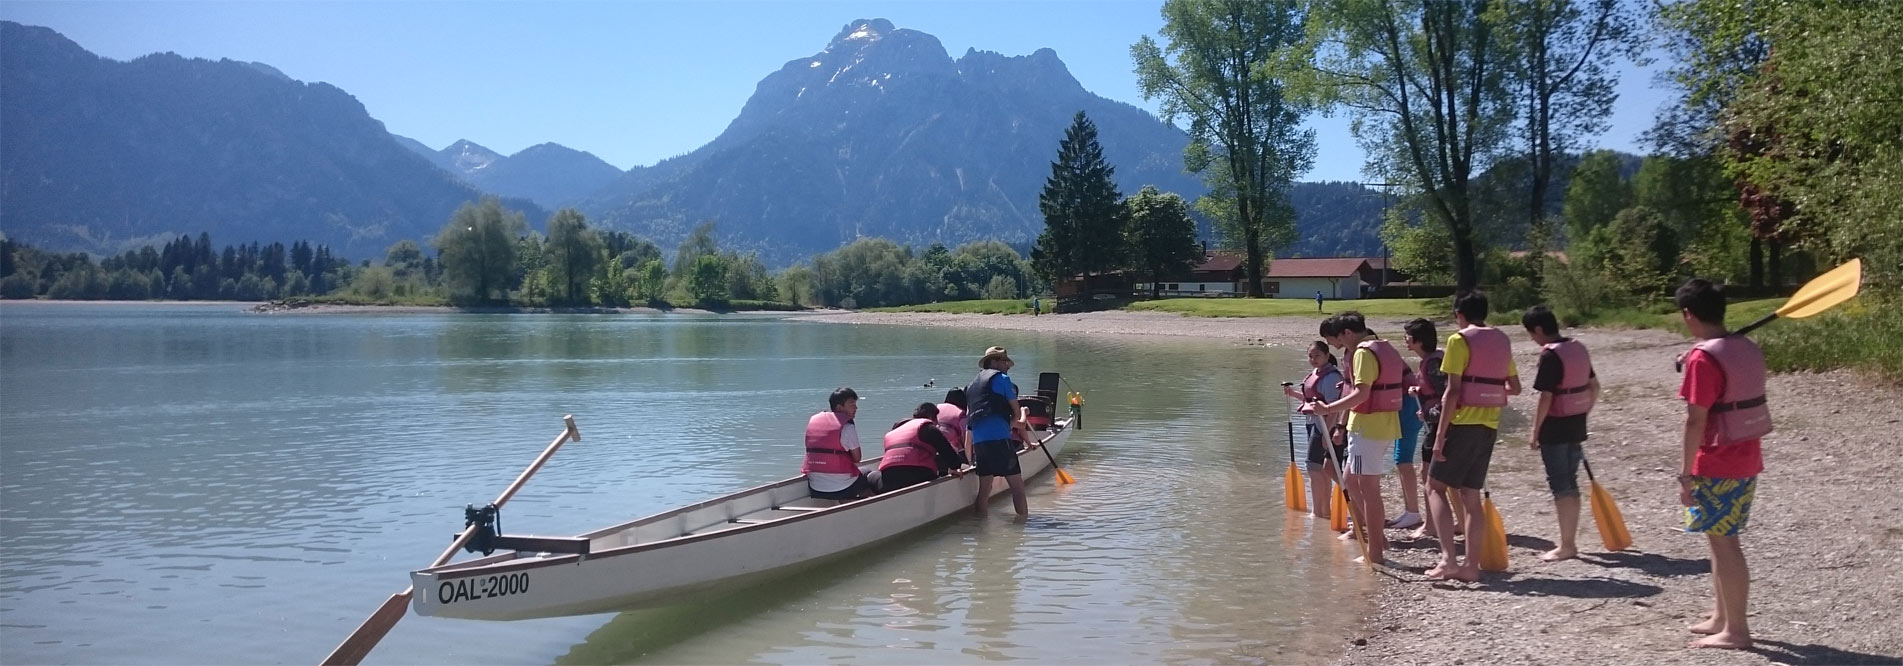 Sports activities: The Allgäu region and the Bavarian Alps offer a wide range of options for sports and leisure activities for our students.